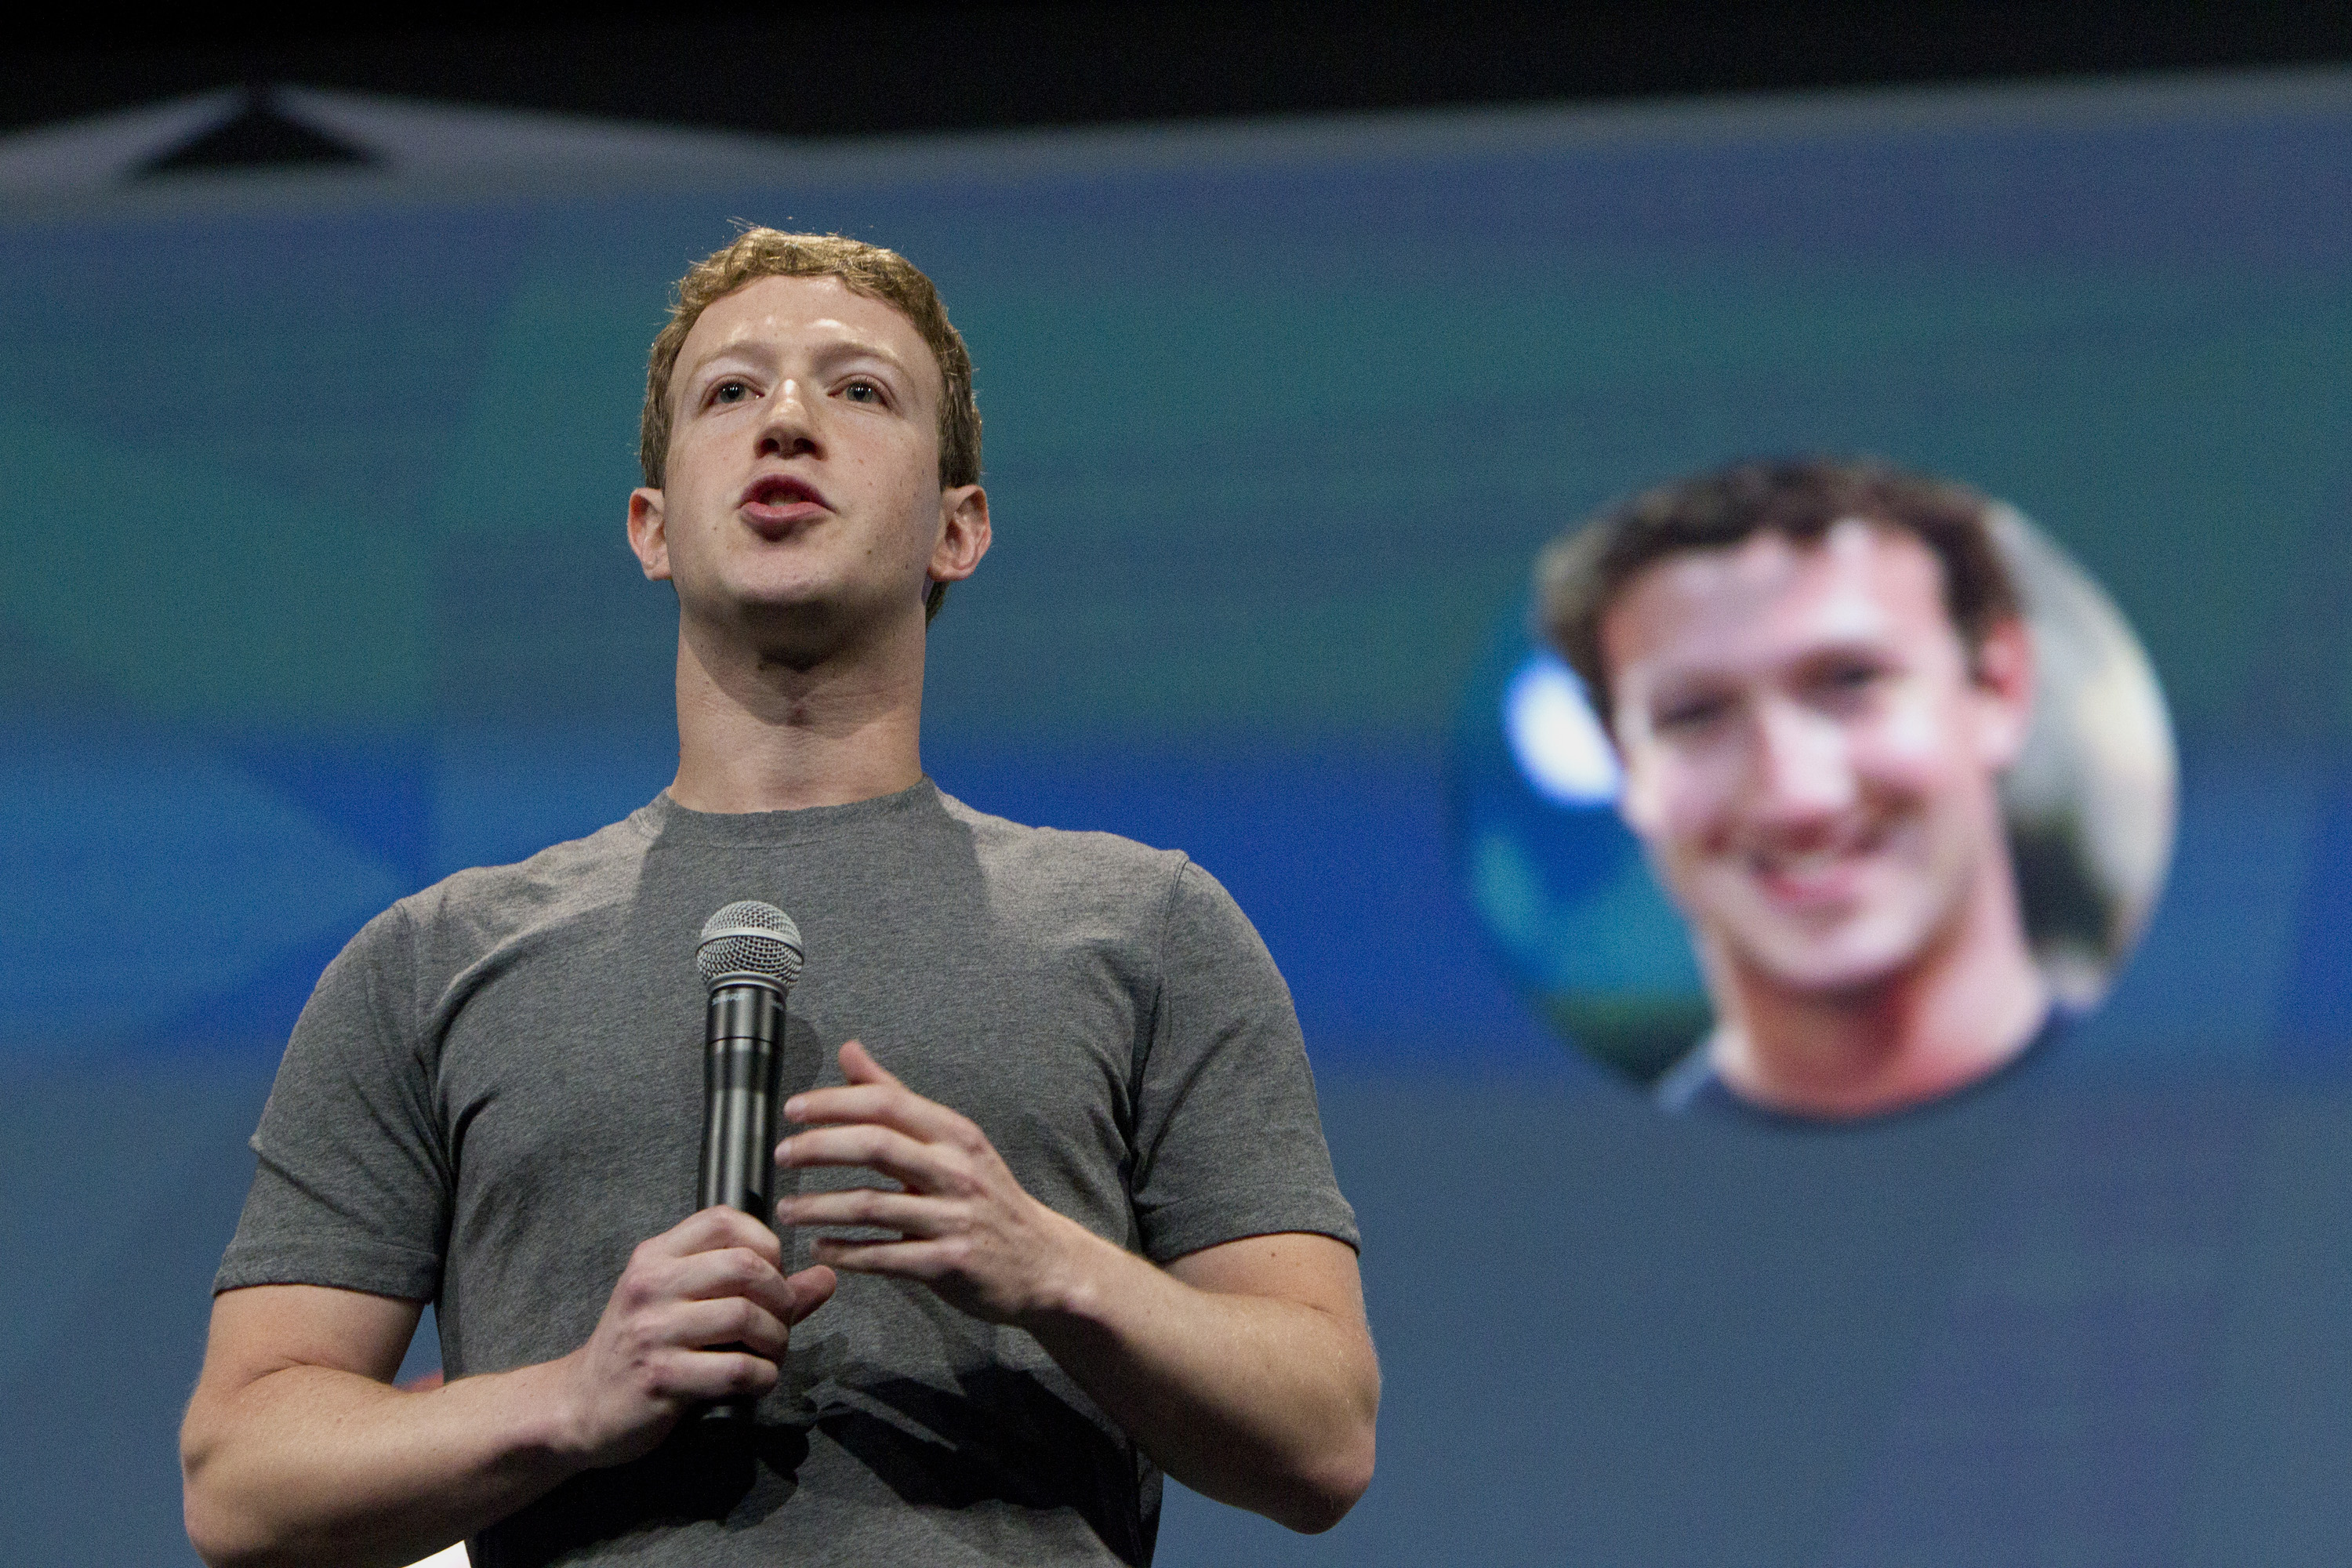 Mark Zuckerberg, chief executive officer of Facebook Inc., speaks during the Facebook F8 Developers Conference in San Francisco, California, U.S., on Wednesday, April 30, 2014. (Bloomberg&mdash;Bloomberg via Getty Images)